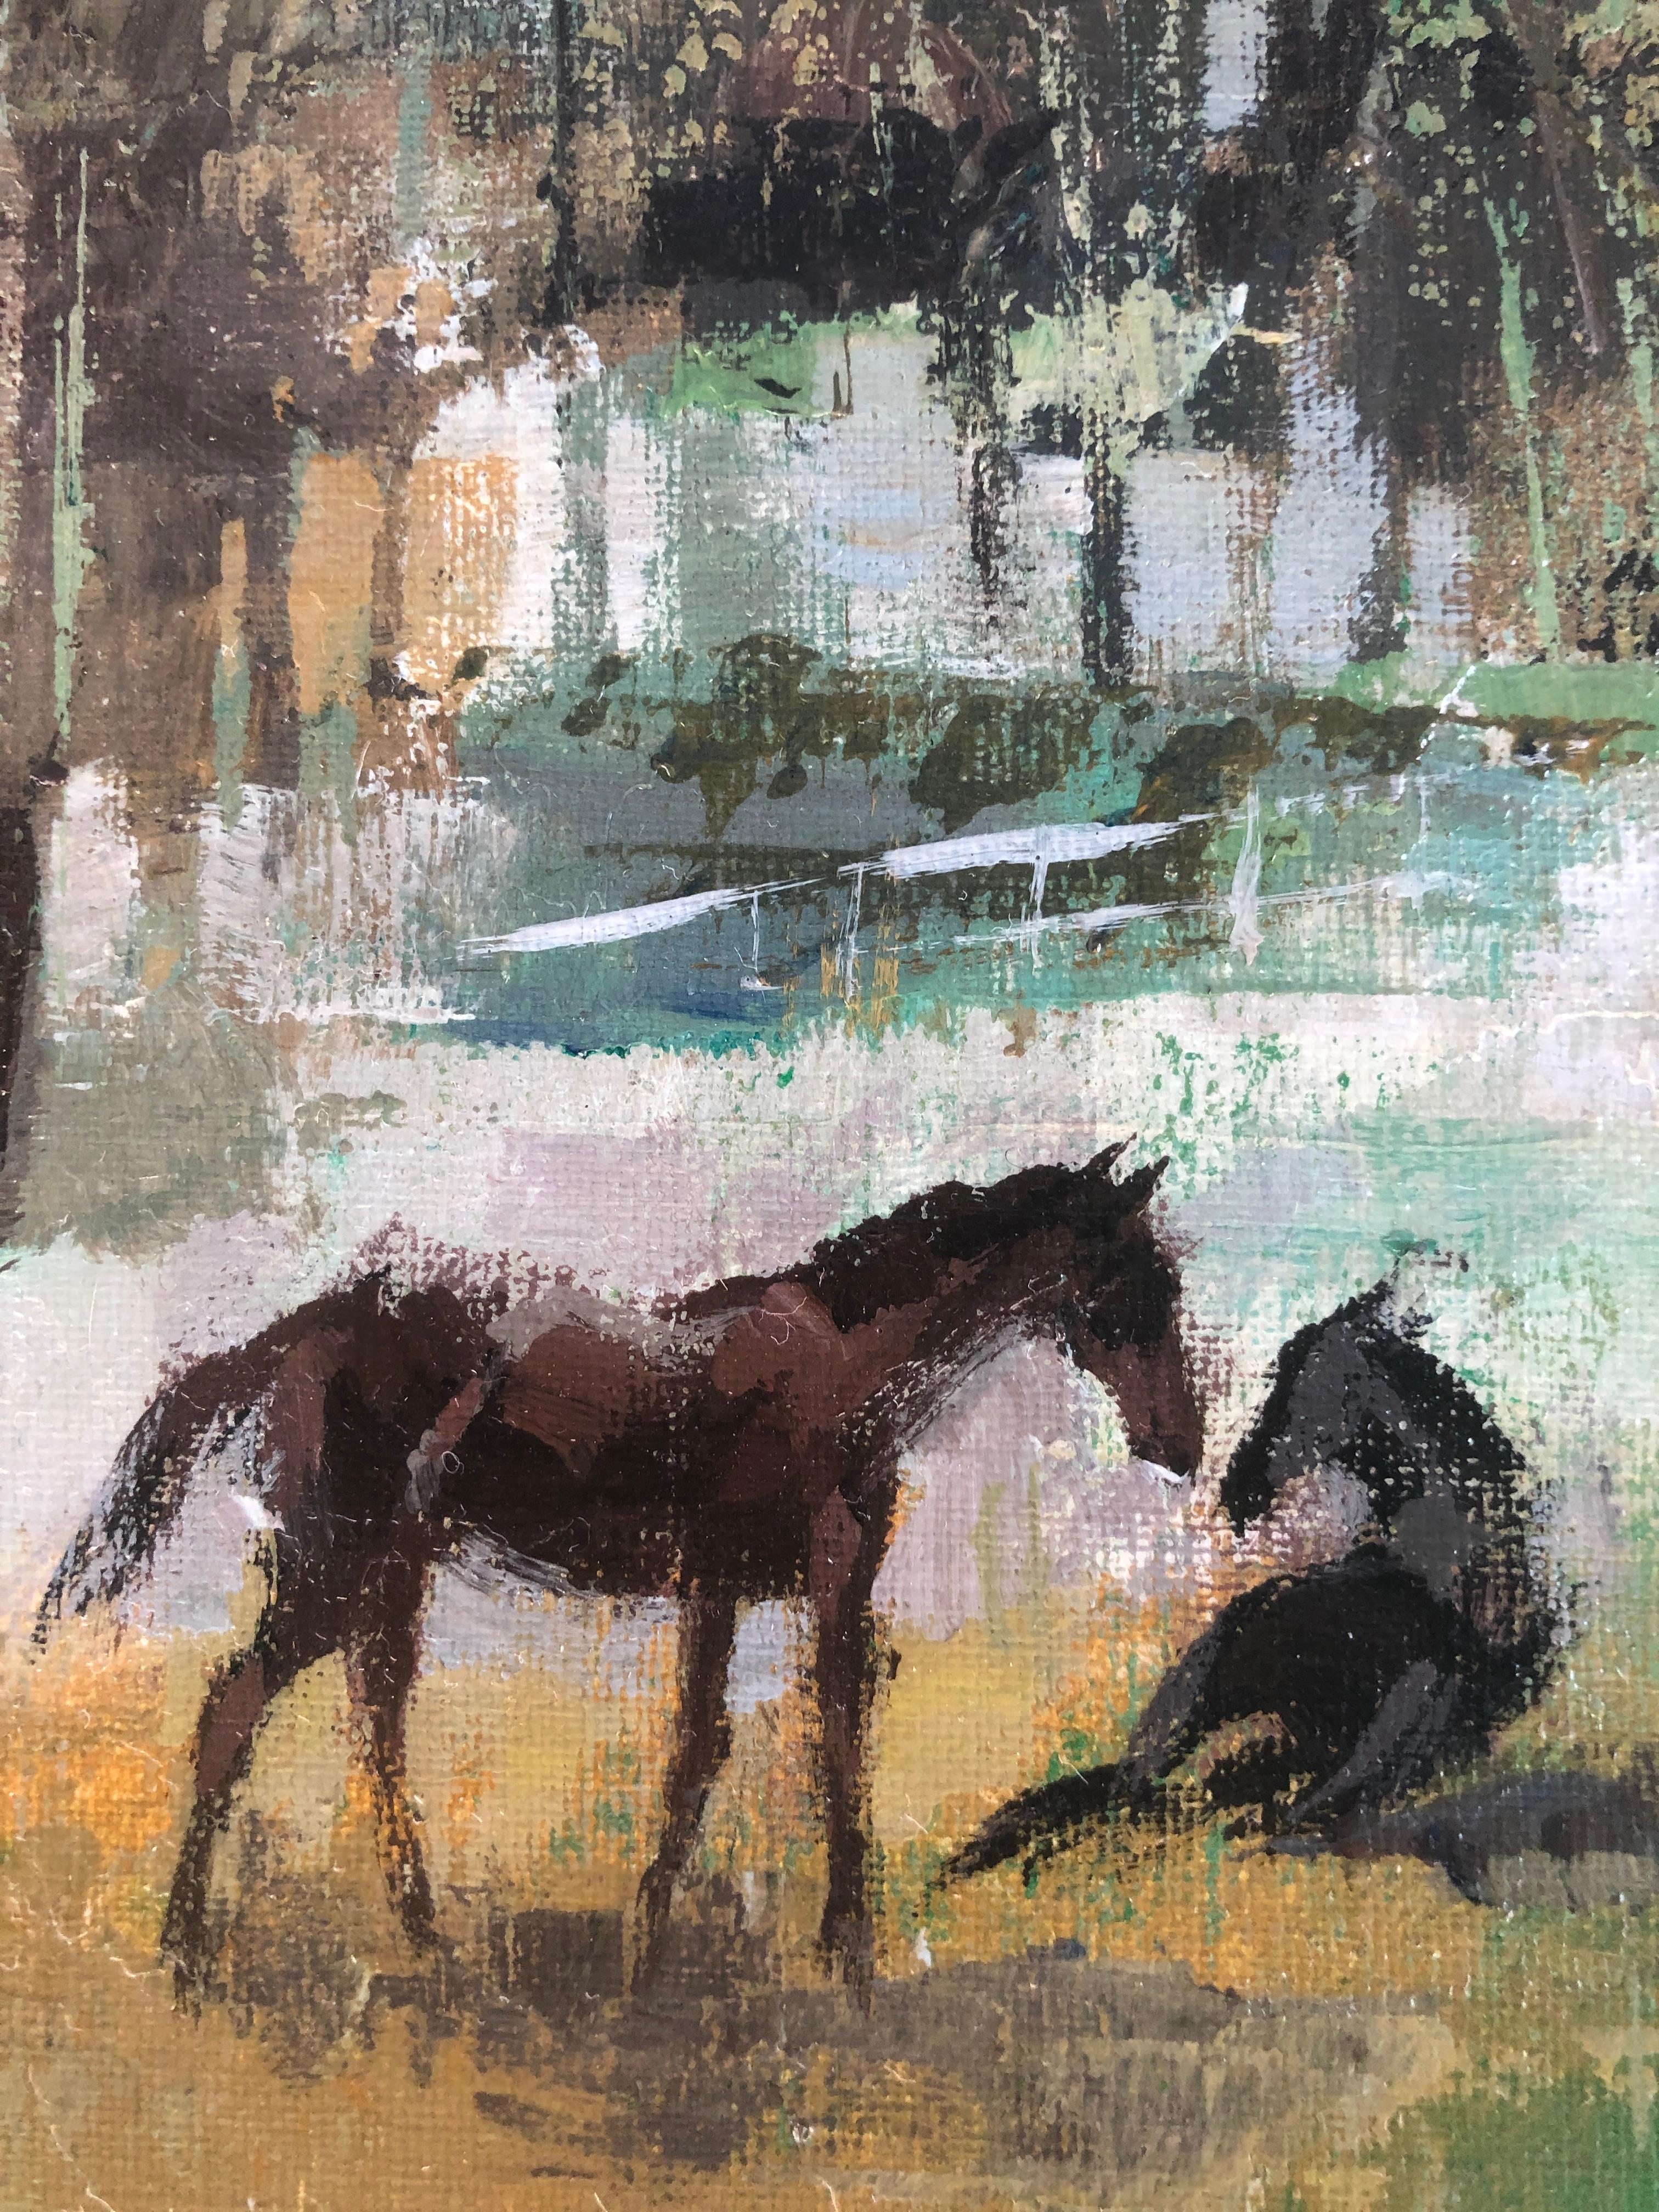 horses in the field landscape oil on canvas painting - Fauvist Painting by Jose Luis Florit Rodero